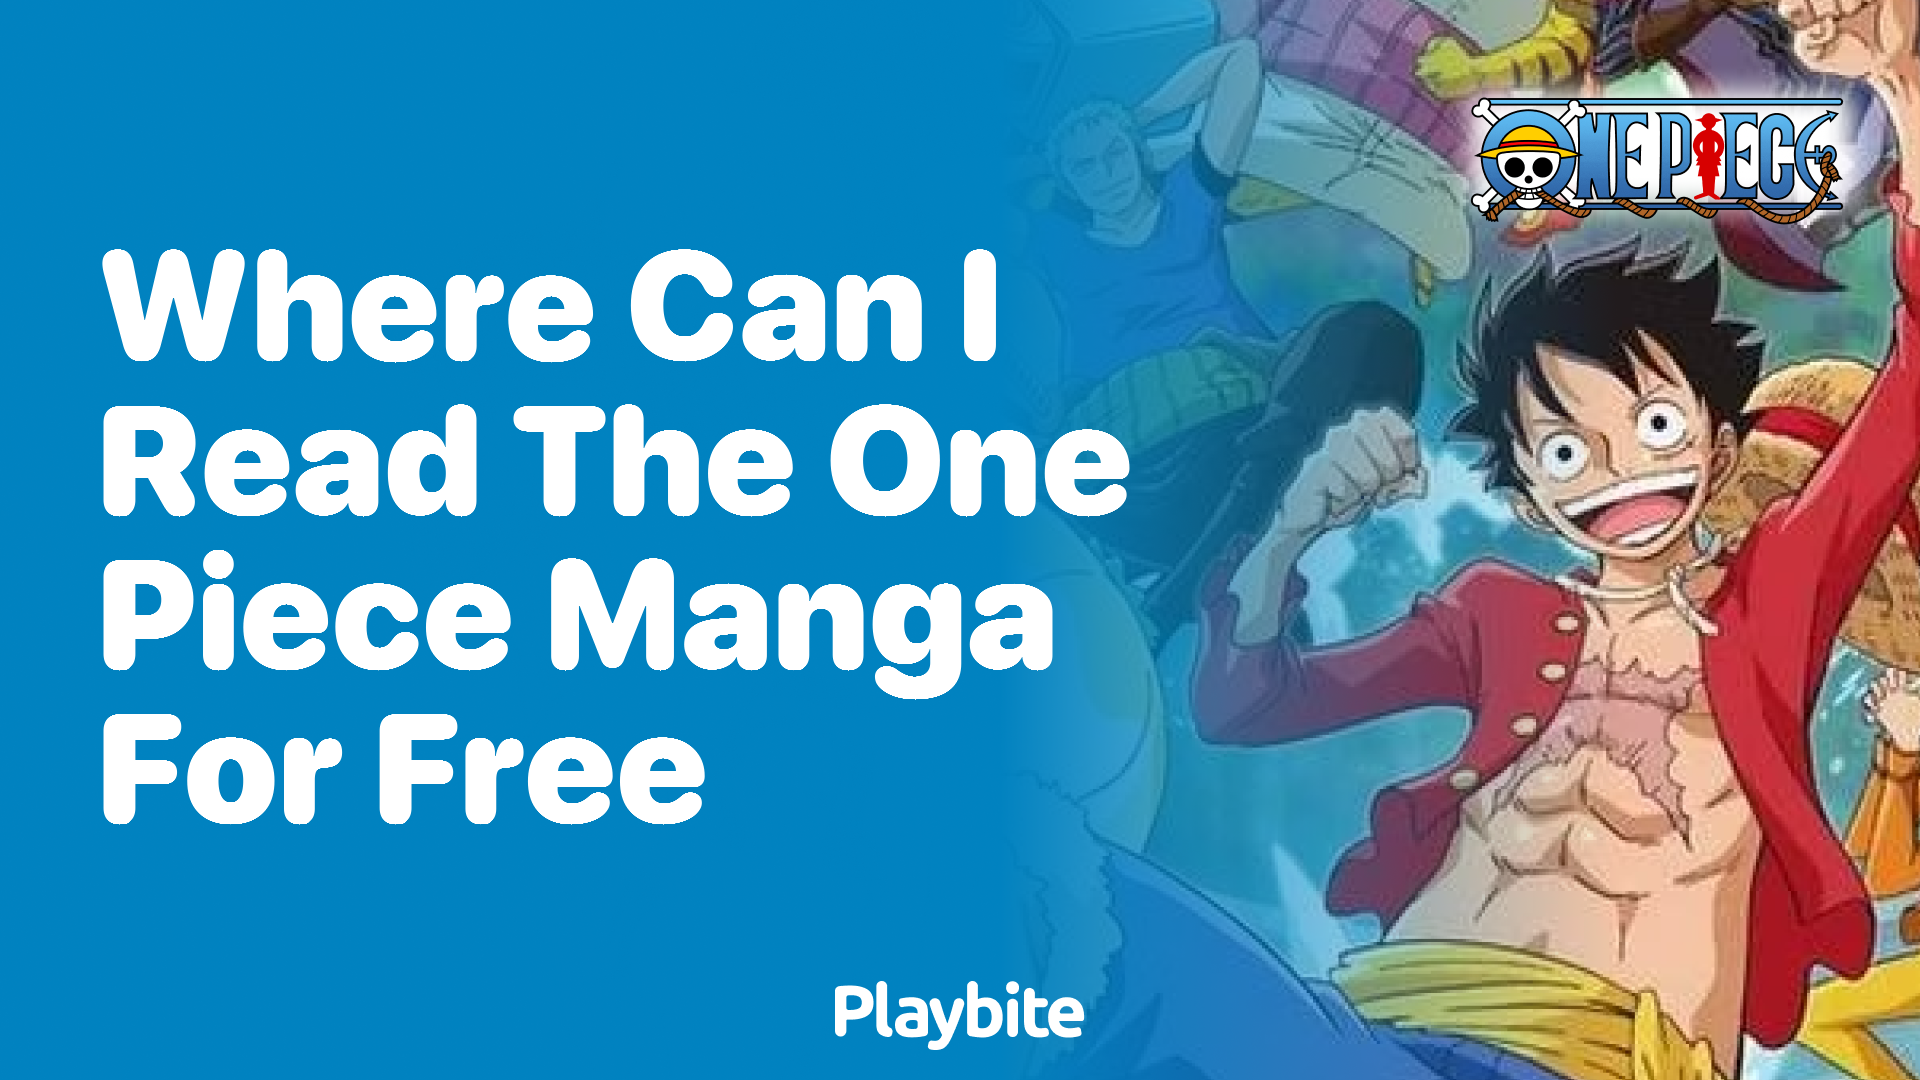 Where Can I Read the One Piece Manga for Free?